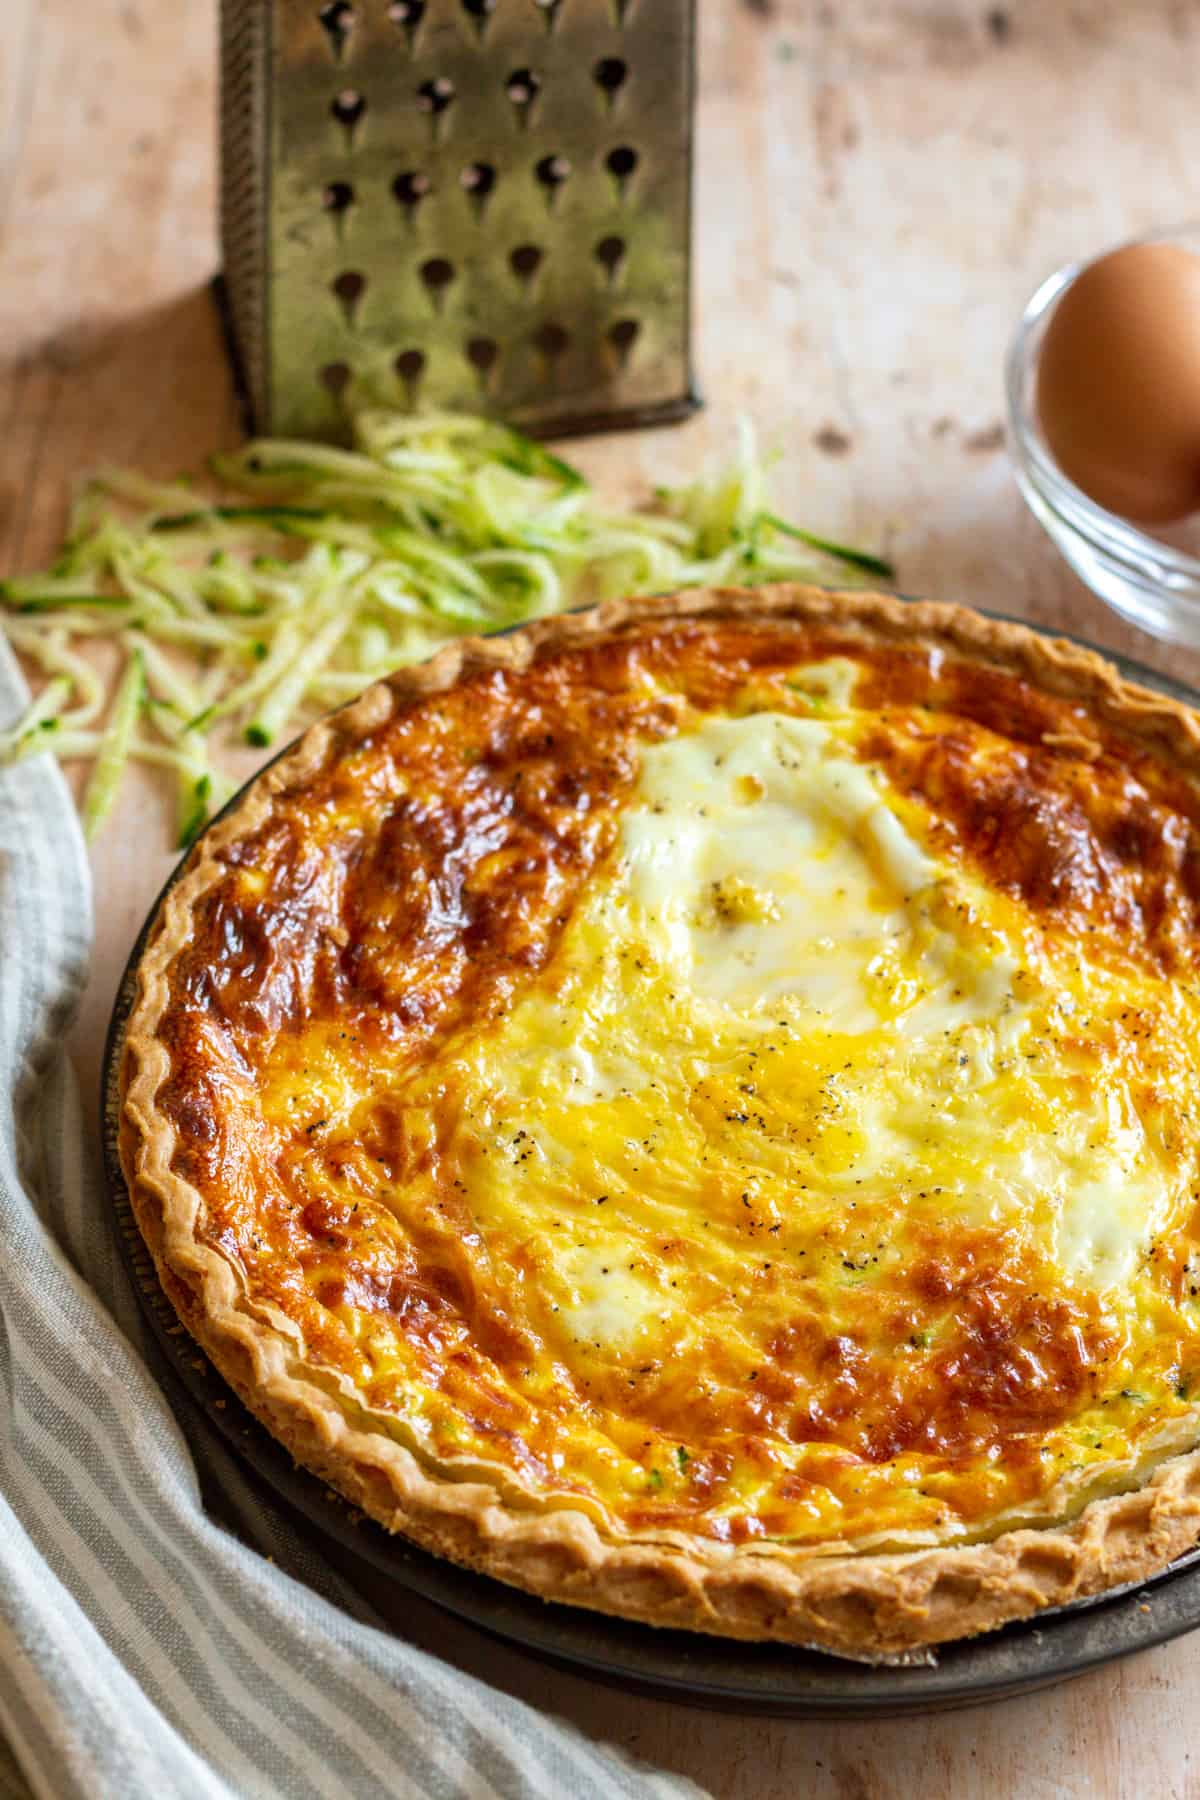 Zucchini quiche in a grey pie tin with a striped napkin, shredded zucchini, and eggs in the background.